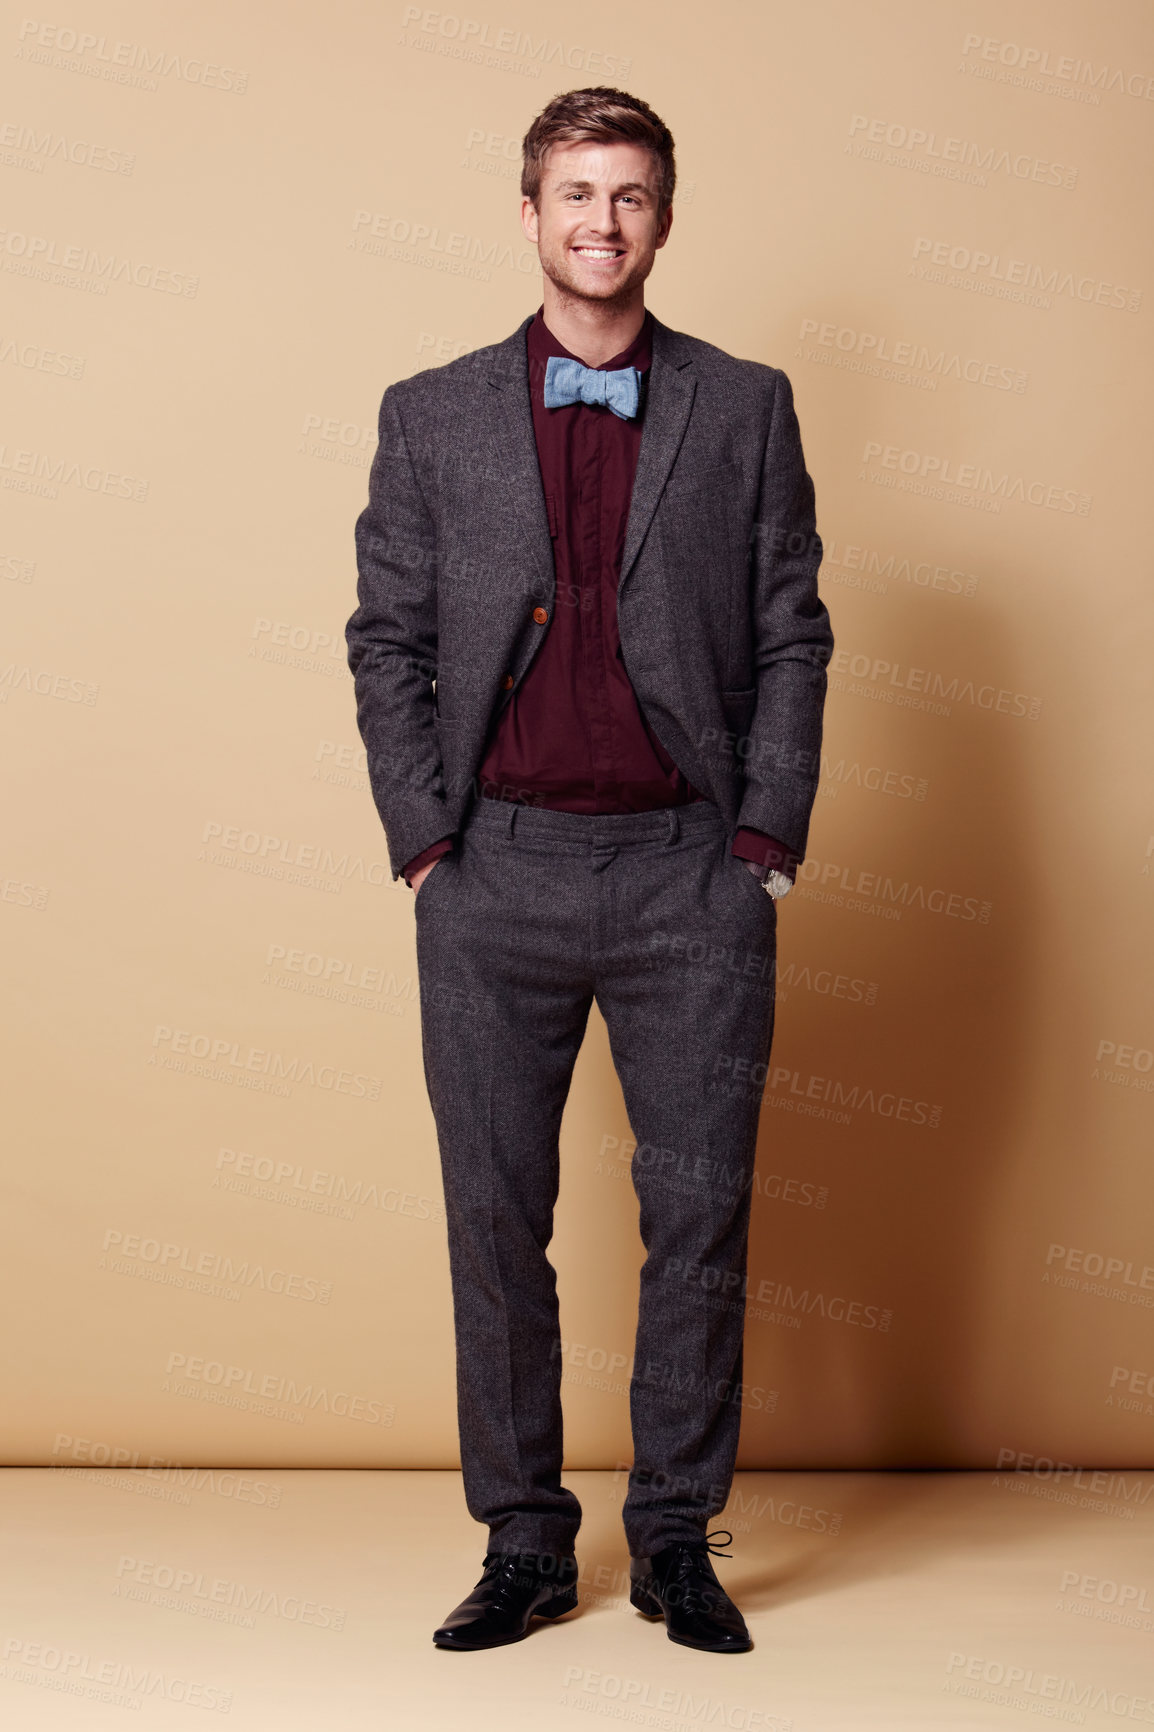 Buy stock photo Full length studio portrait of a stylishly-dressed young man smiling at the camera